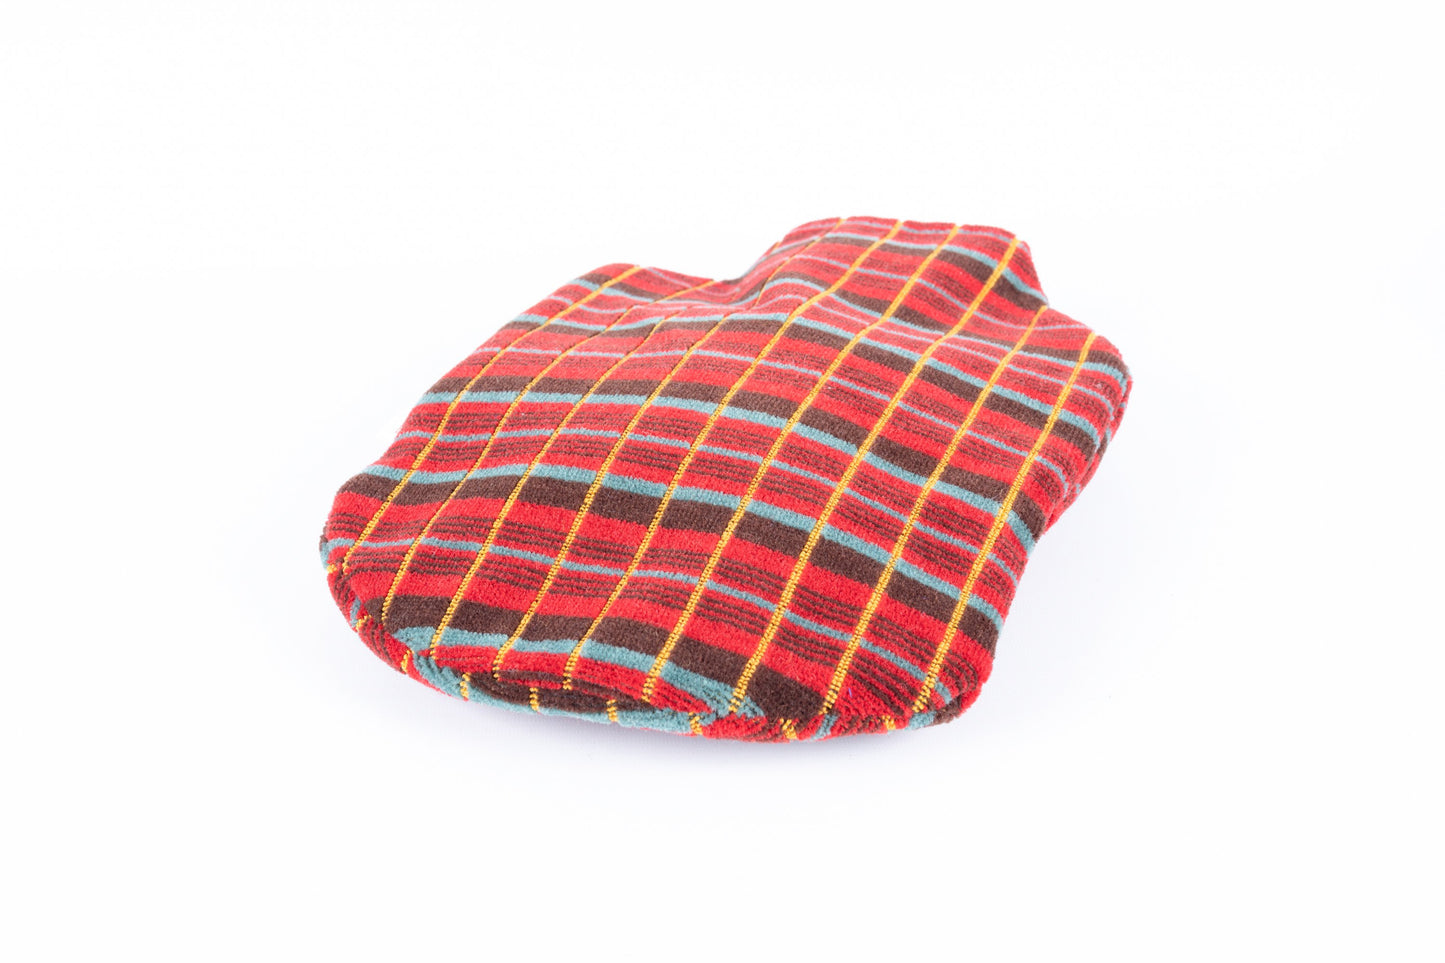 London Transport Routemaster (RM) Bus Moquette Hot Water Bottle Cover